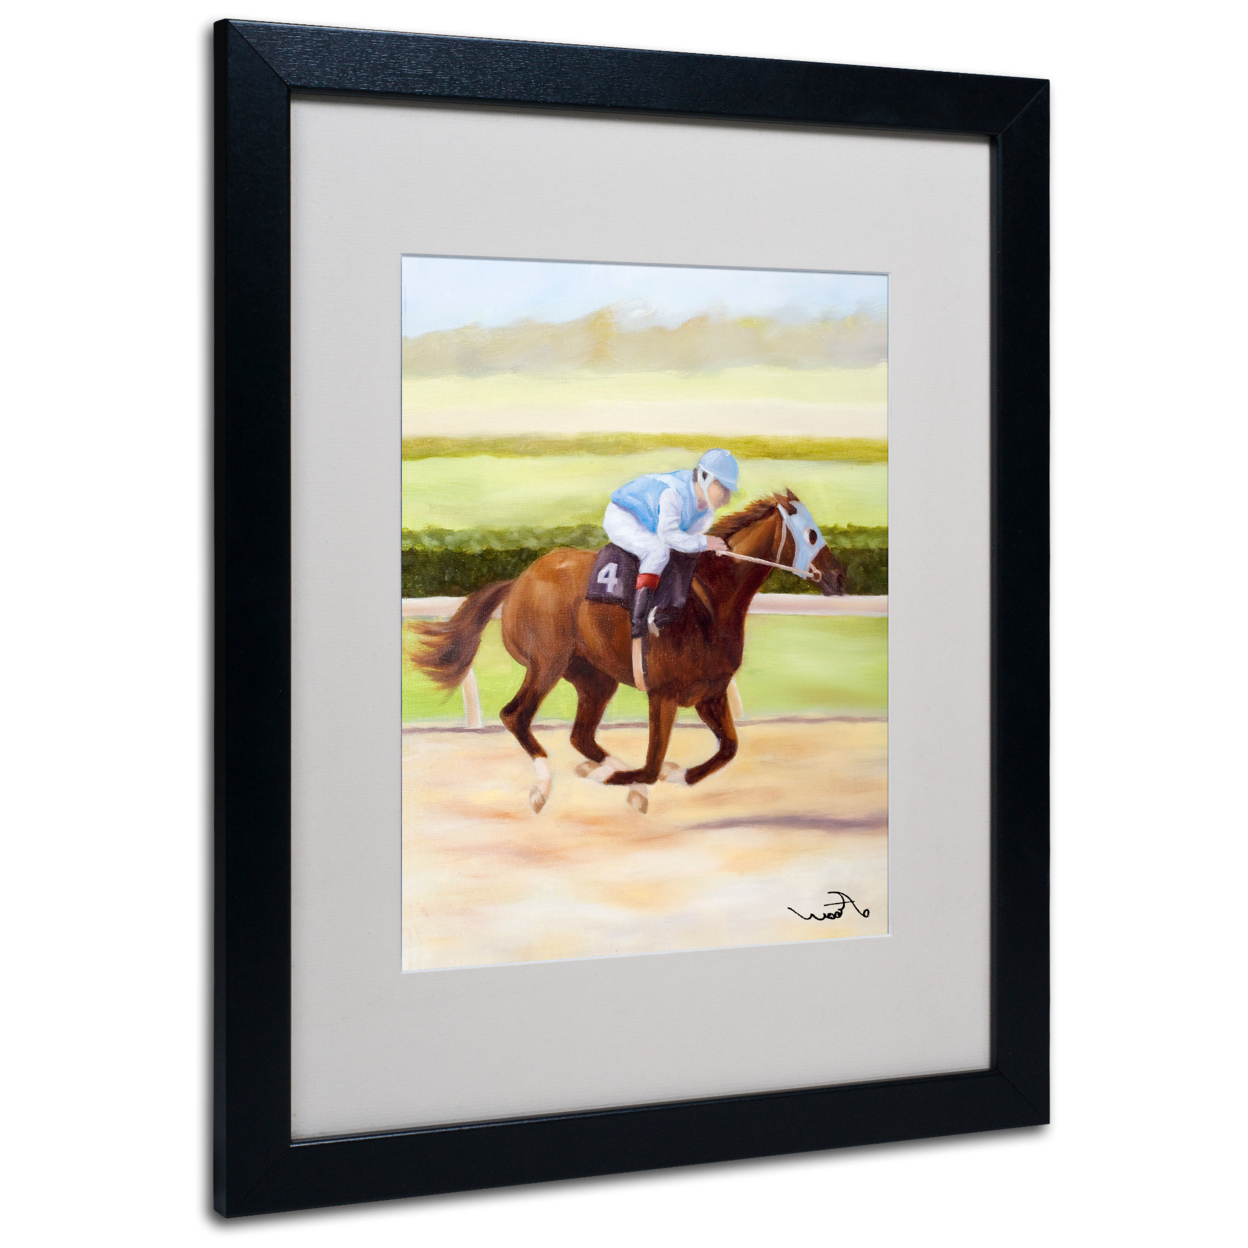 Michelle Moate 'Horse Of Sport II' Black Wooden Framed Art 18 X 22 Inches